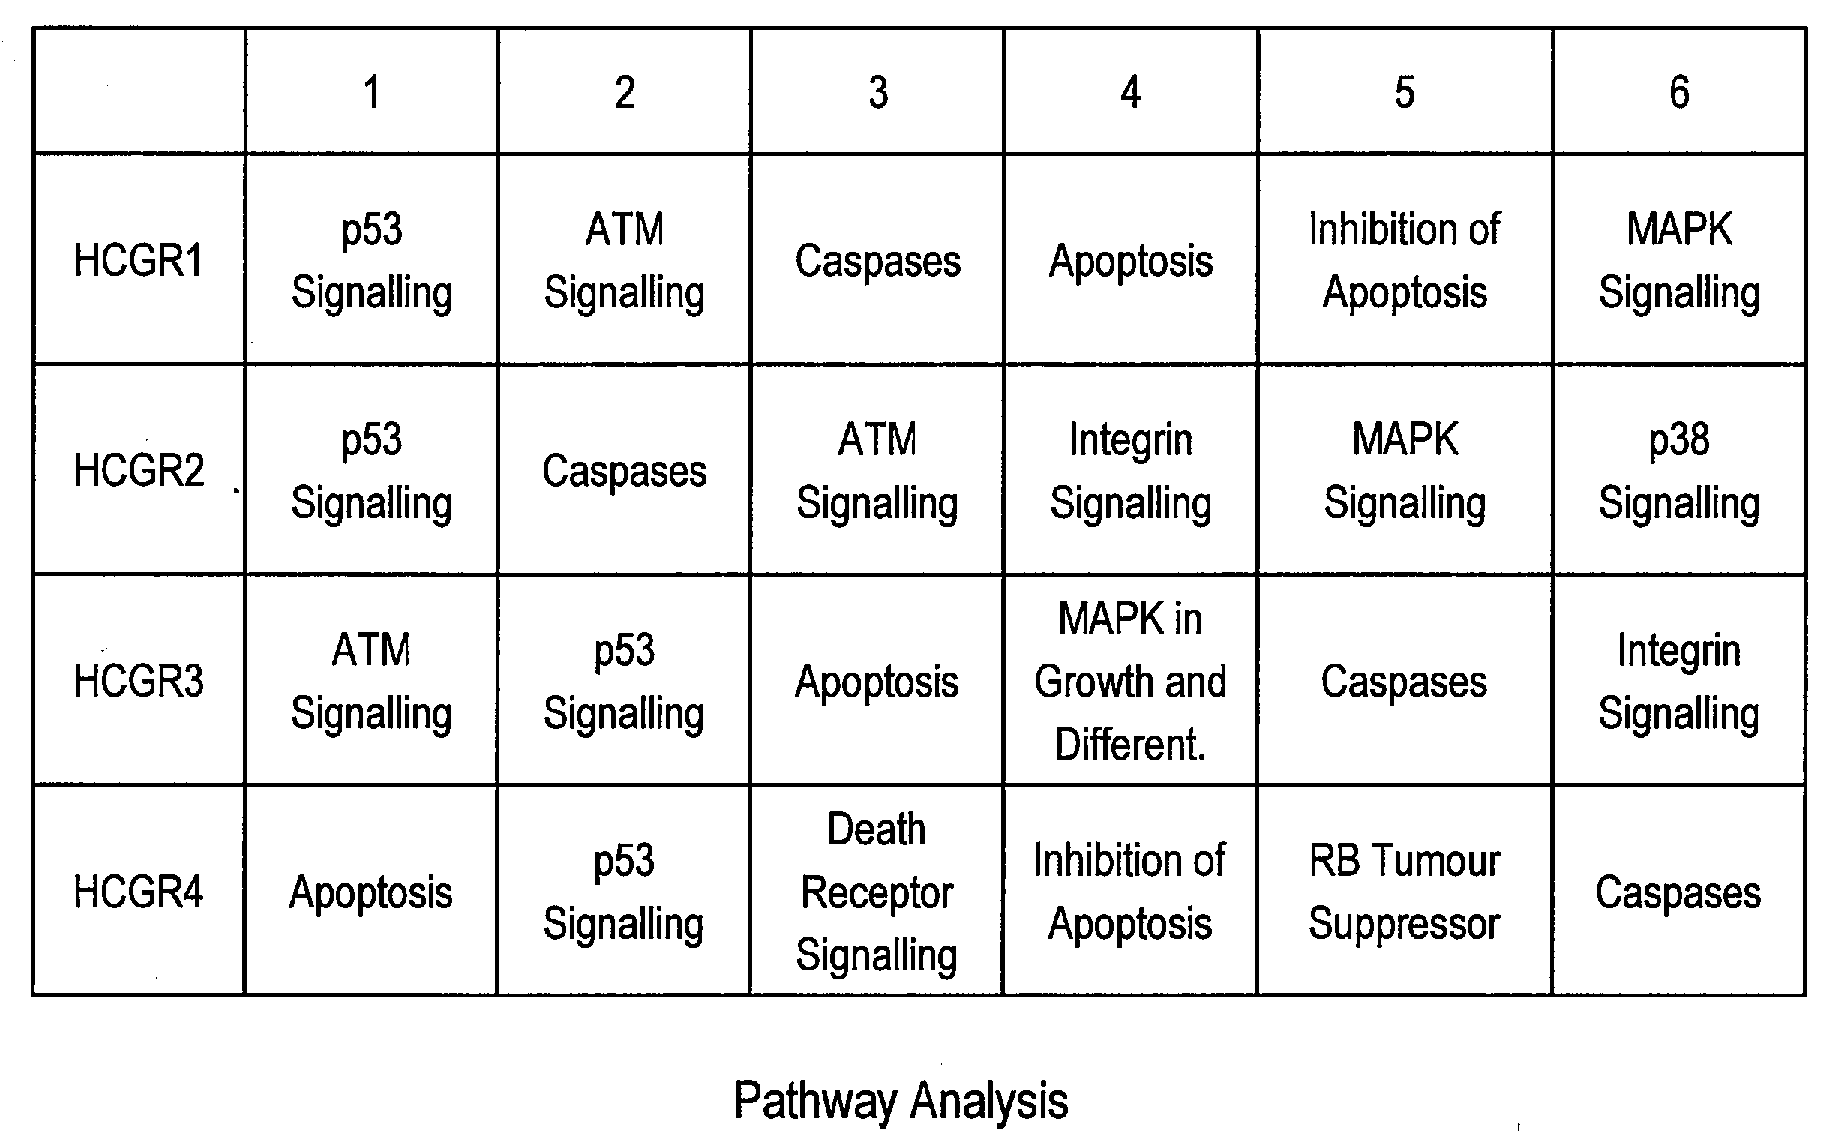 Pathway Analysis of Cell Culture Phenotypes and Uses Thereof